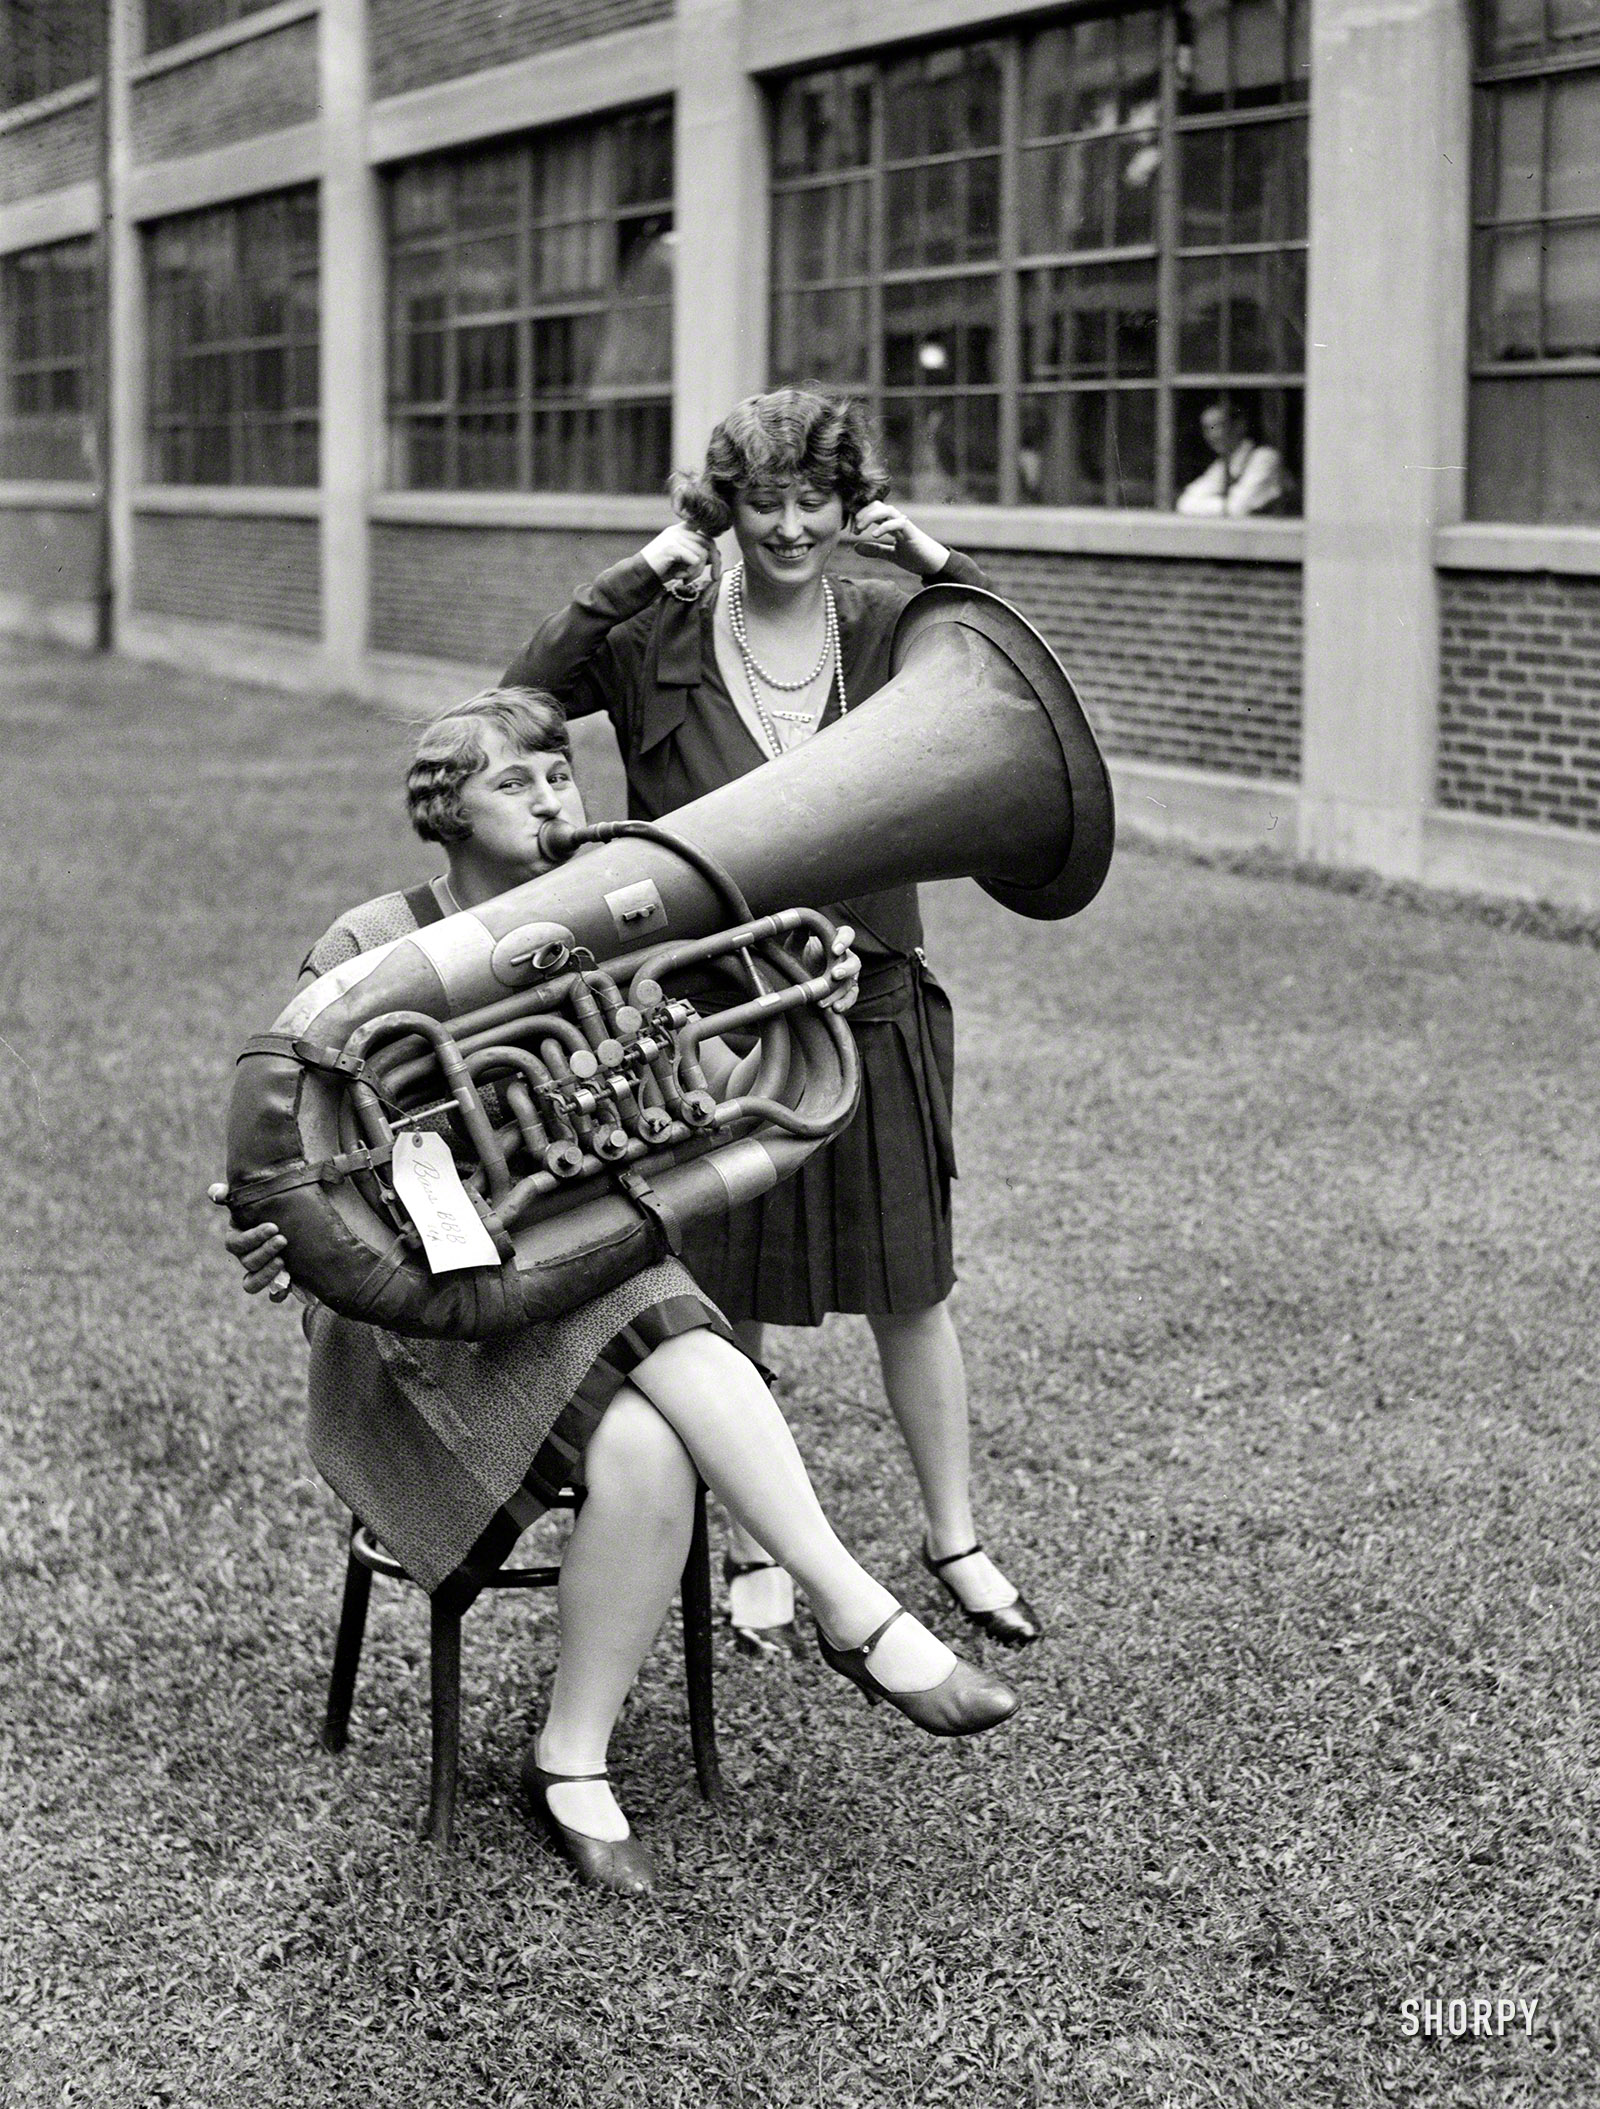 Washington, D.C., 1928. Going out on a low note: "Women with contrabass tuba" is all it says here. Harris & Ewing Collection glass negative. View full size.
